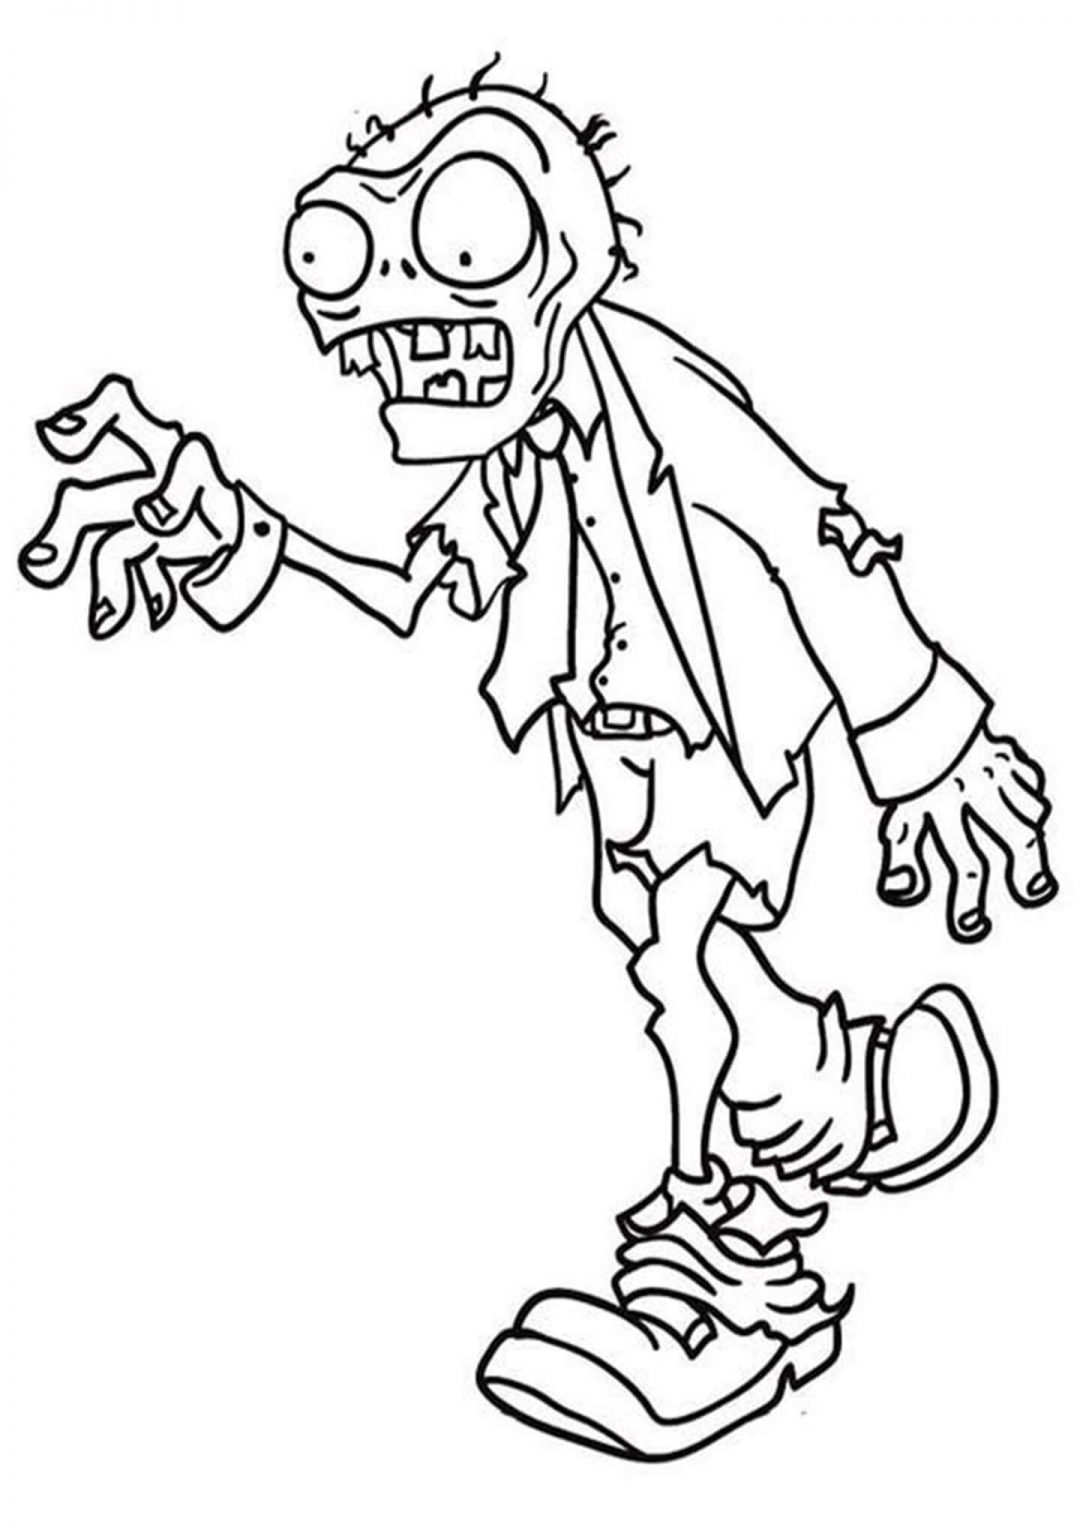 plants-vs-zombies-coloring-pages-for-kids